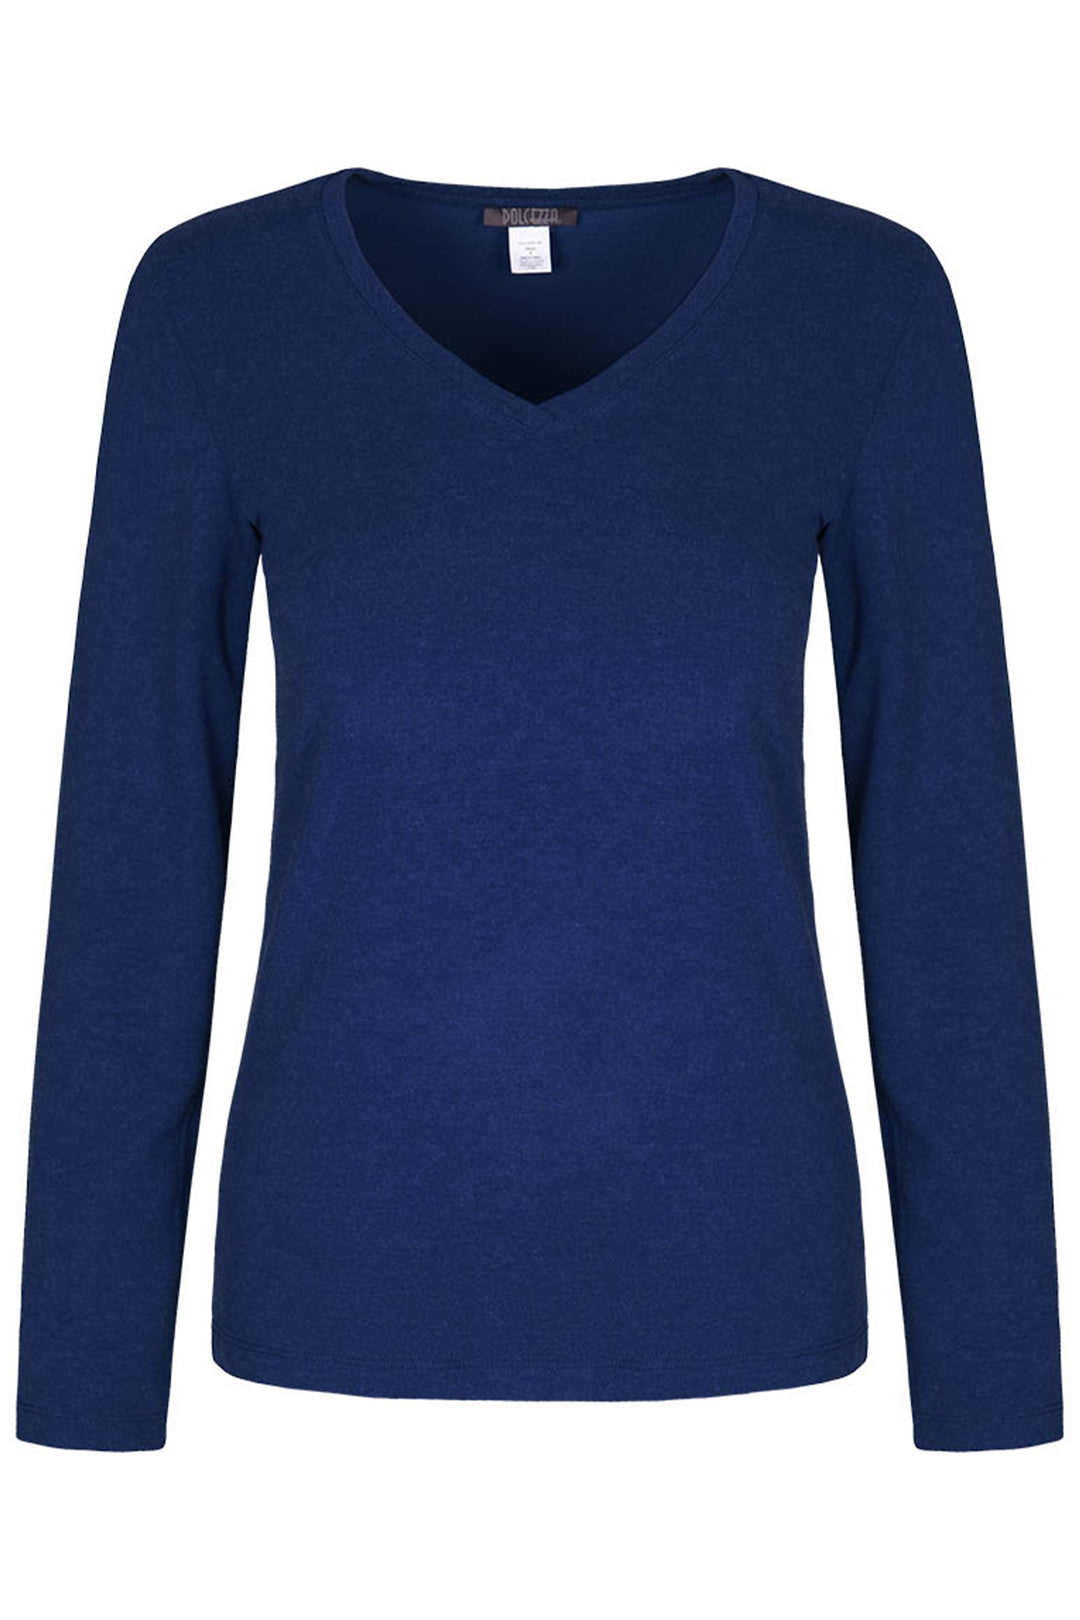 Dolcezza women's long sleeve V-neck cotton top - Royal front